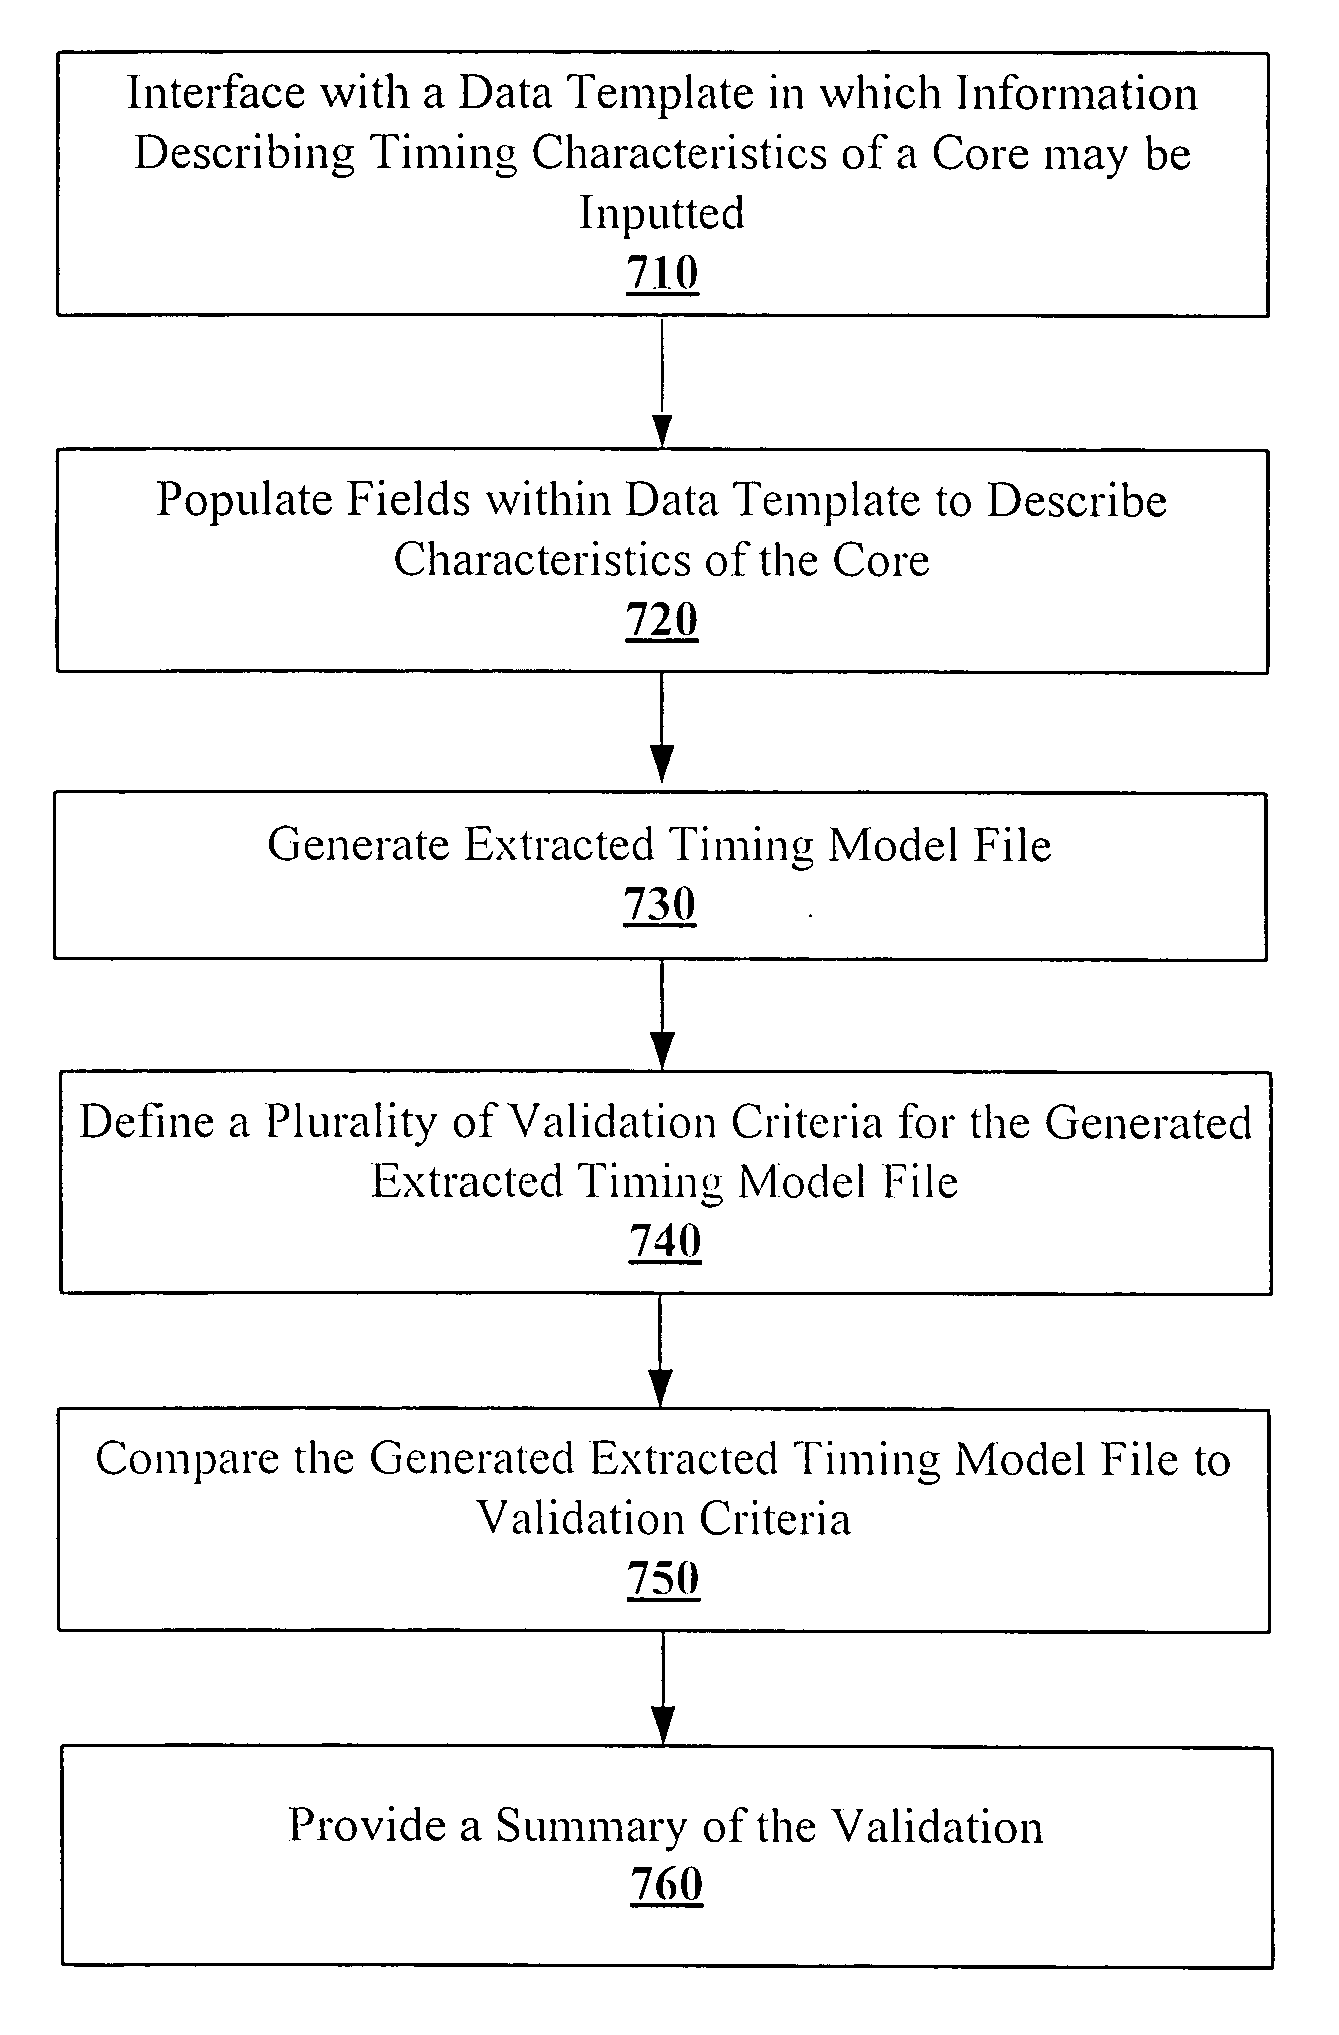 Verification of an extracted timing model file